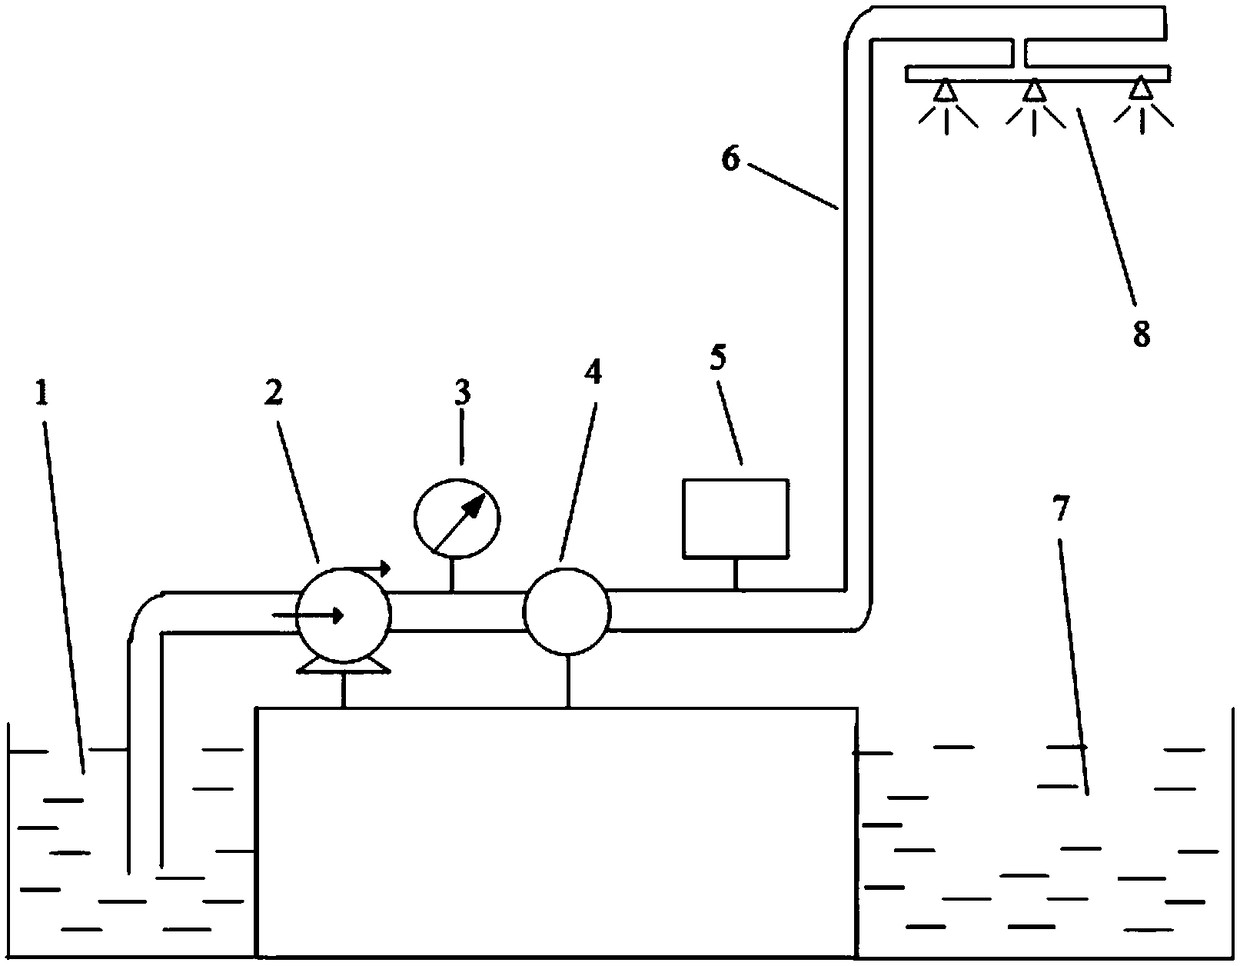 Method and device for measuring underwater noise generated by artificial rainfall